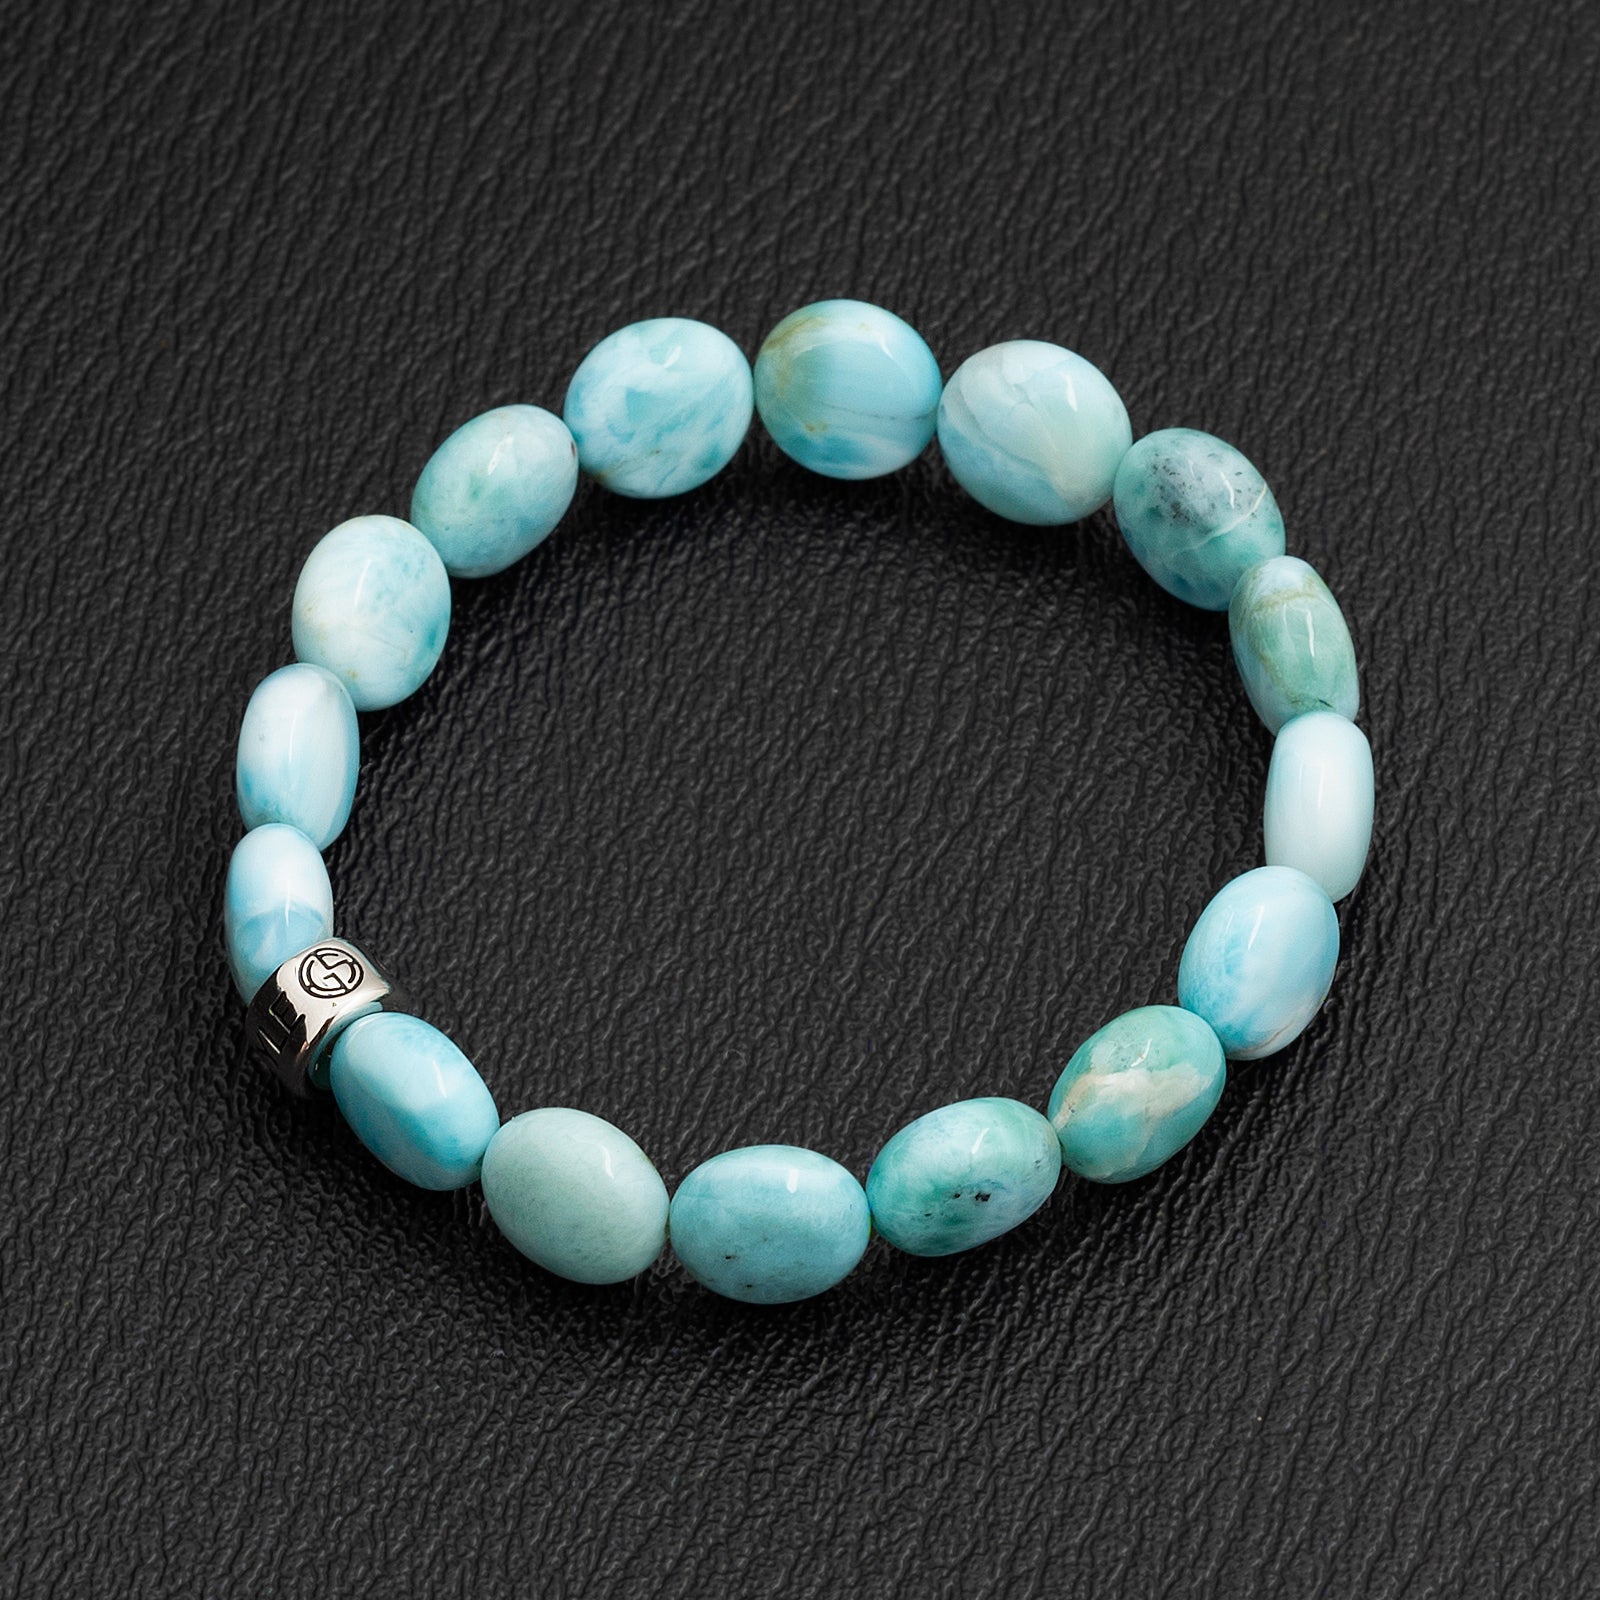 Blue Brilliance” – Natural blue Larimar bracelet for women and men. Give  AAAAAA natural beauty! – Corano Jewelry